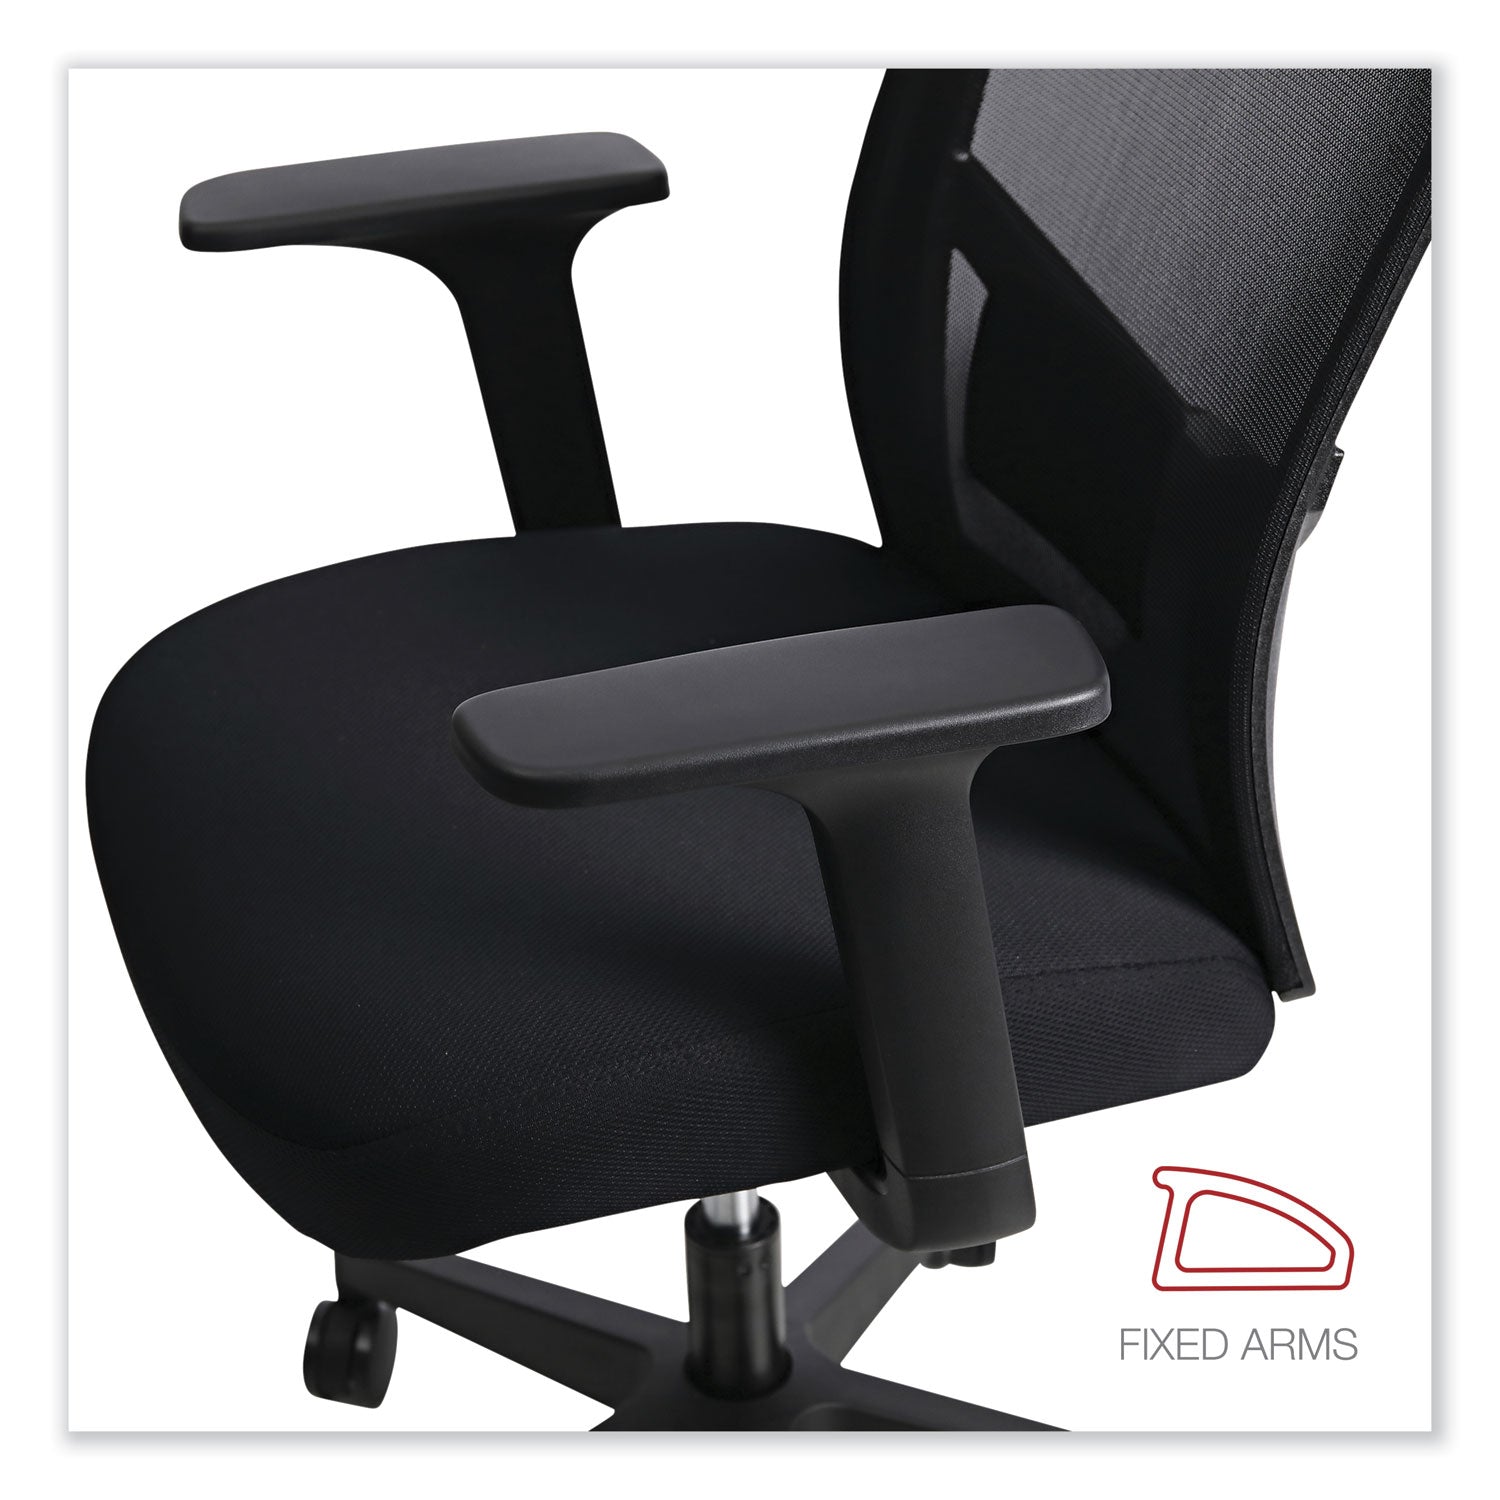 mesh-back-fabric-task-chair-supports-up-to-275-lb-1732-to-211-seat-height-black-seat-black-back_alews42b17 - 6